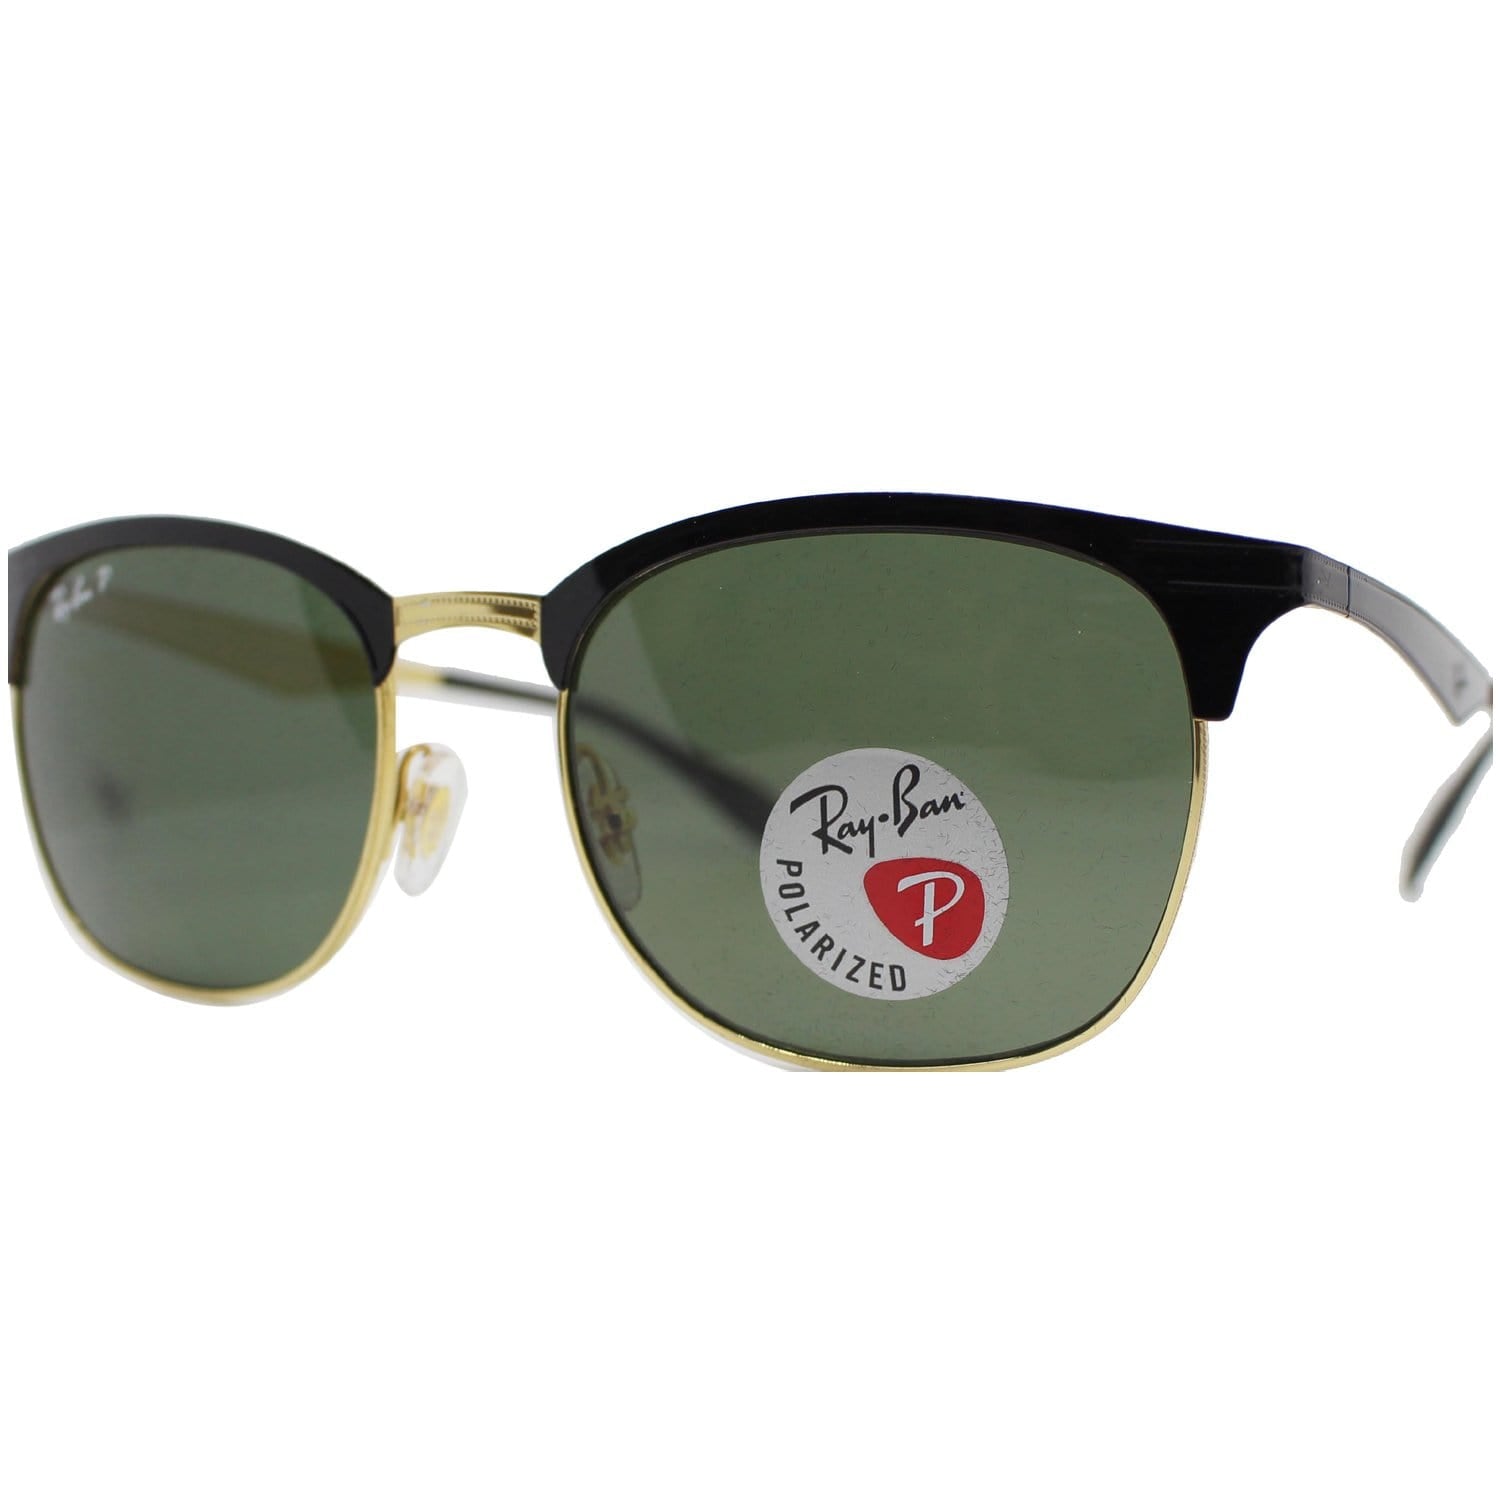 Ray Ban Rb3538 187 9a Sunglasses Green Classic G 15 Polarized Lens